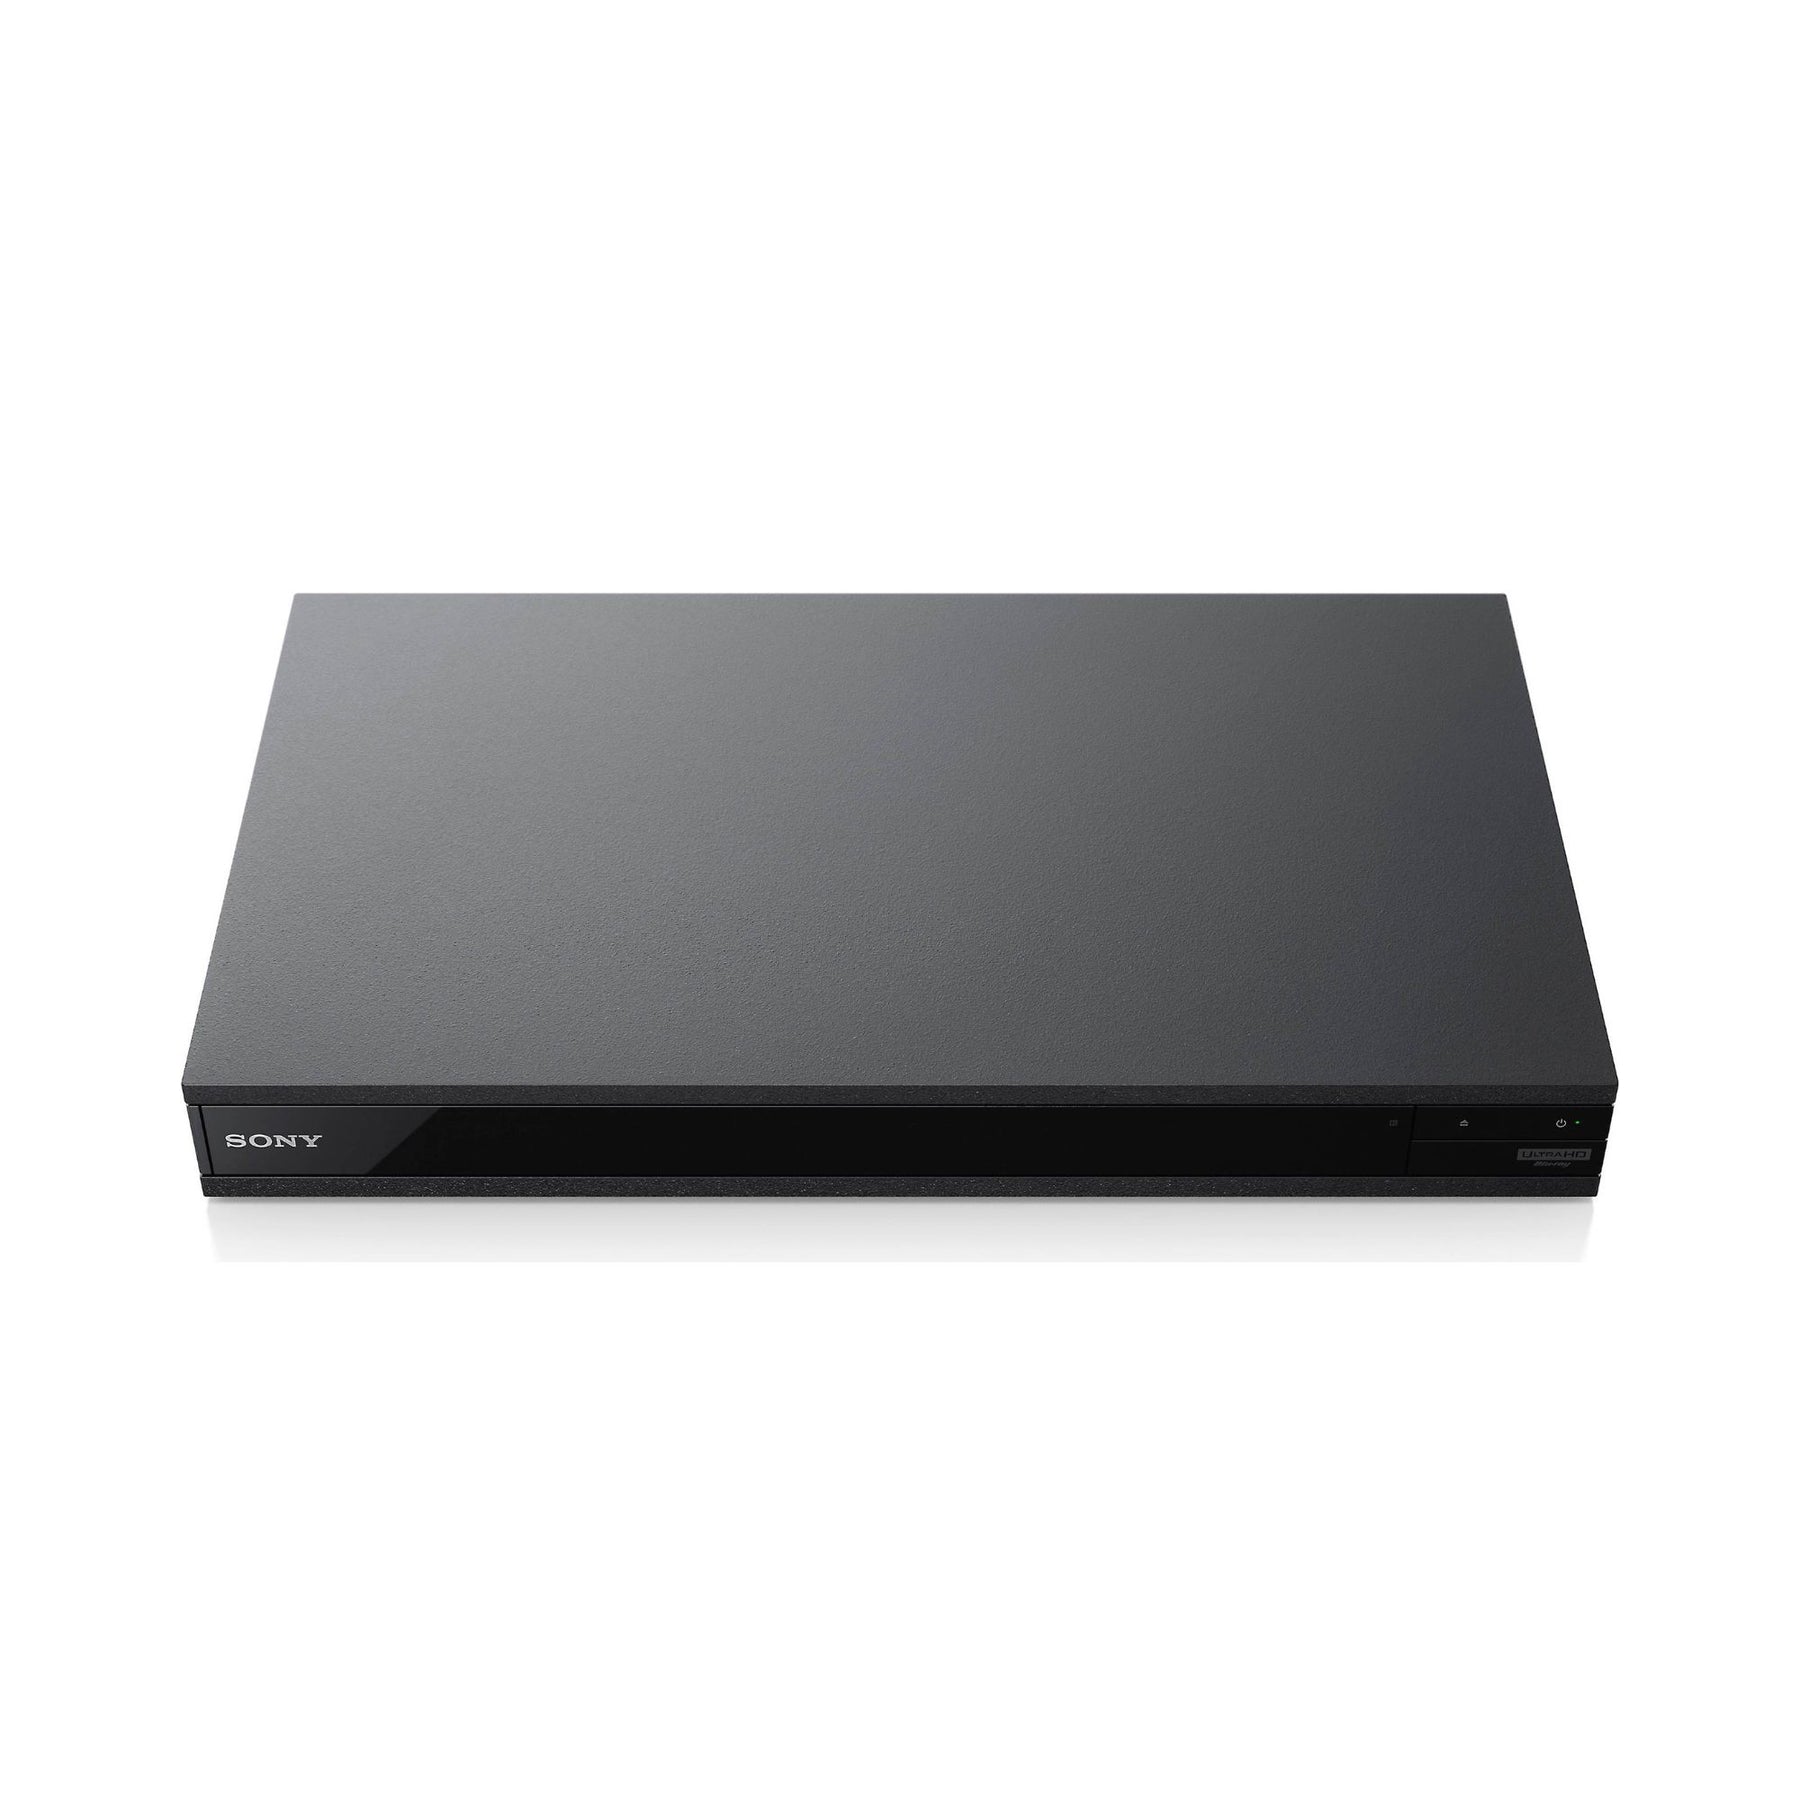 Sony UBP-X800M2 - 4K Ultra HD Blu-ray player with Wi-Fi® and Bluetooth®, Sony, 4K & Blu-ray Disc Players - AVStore.in